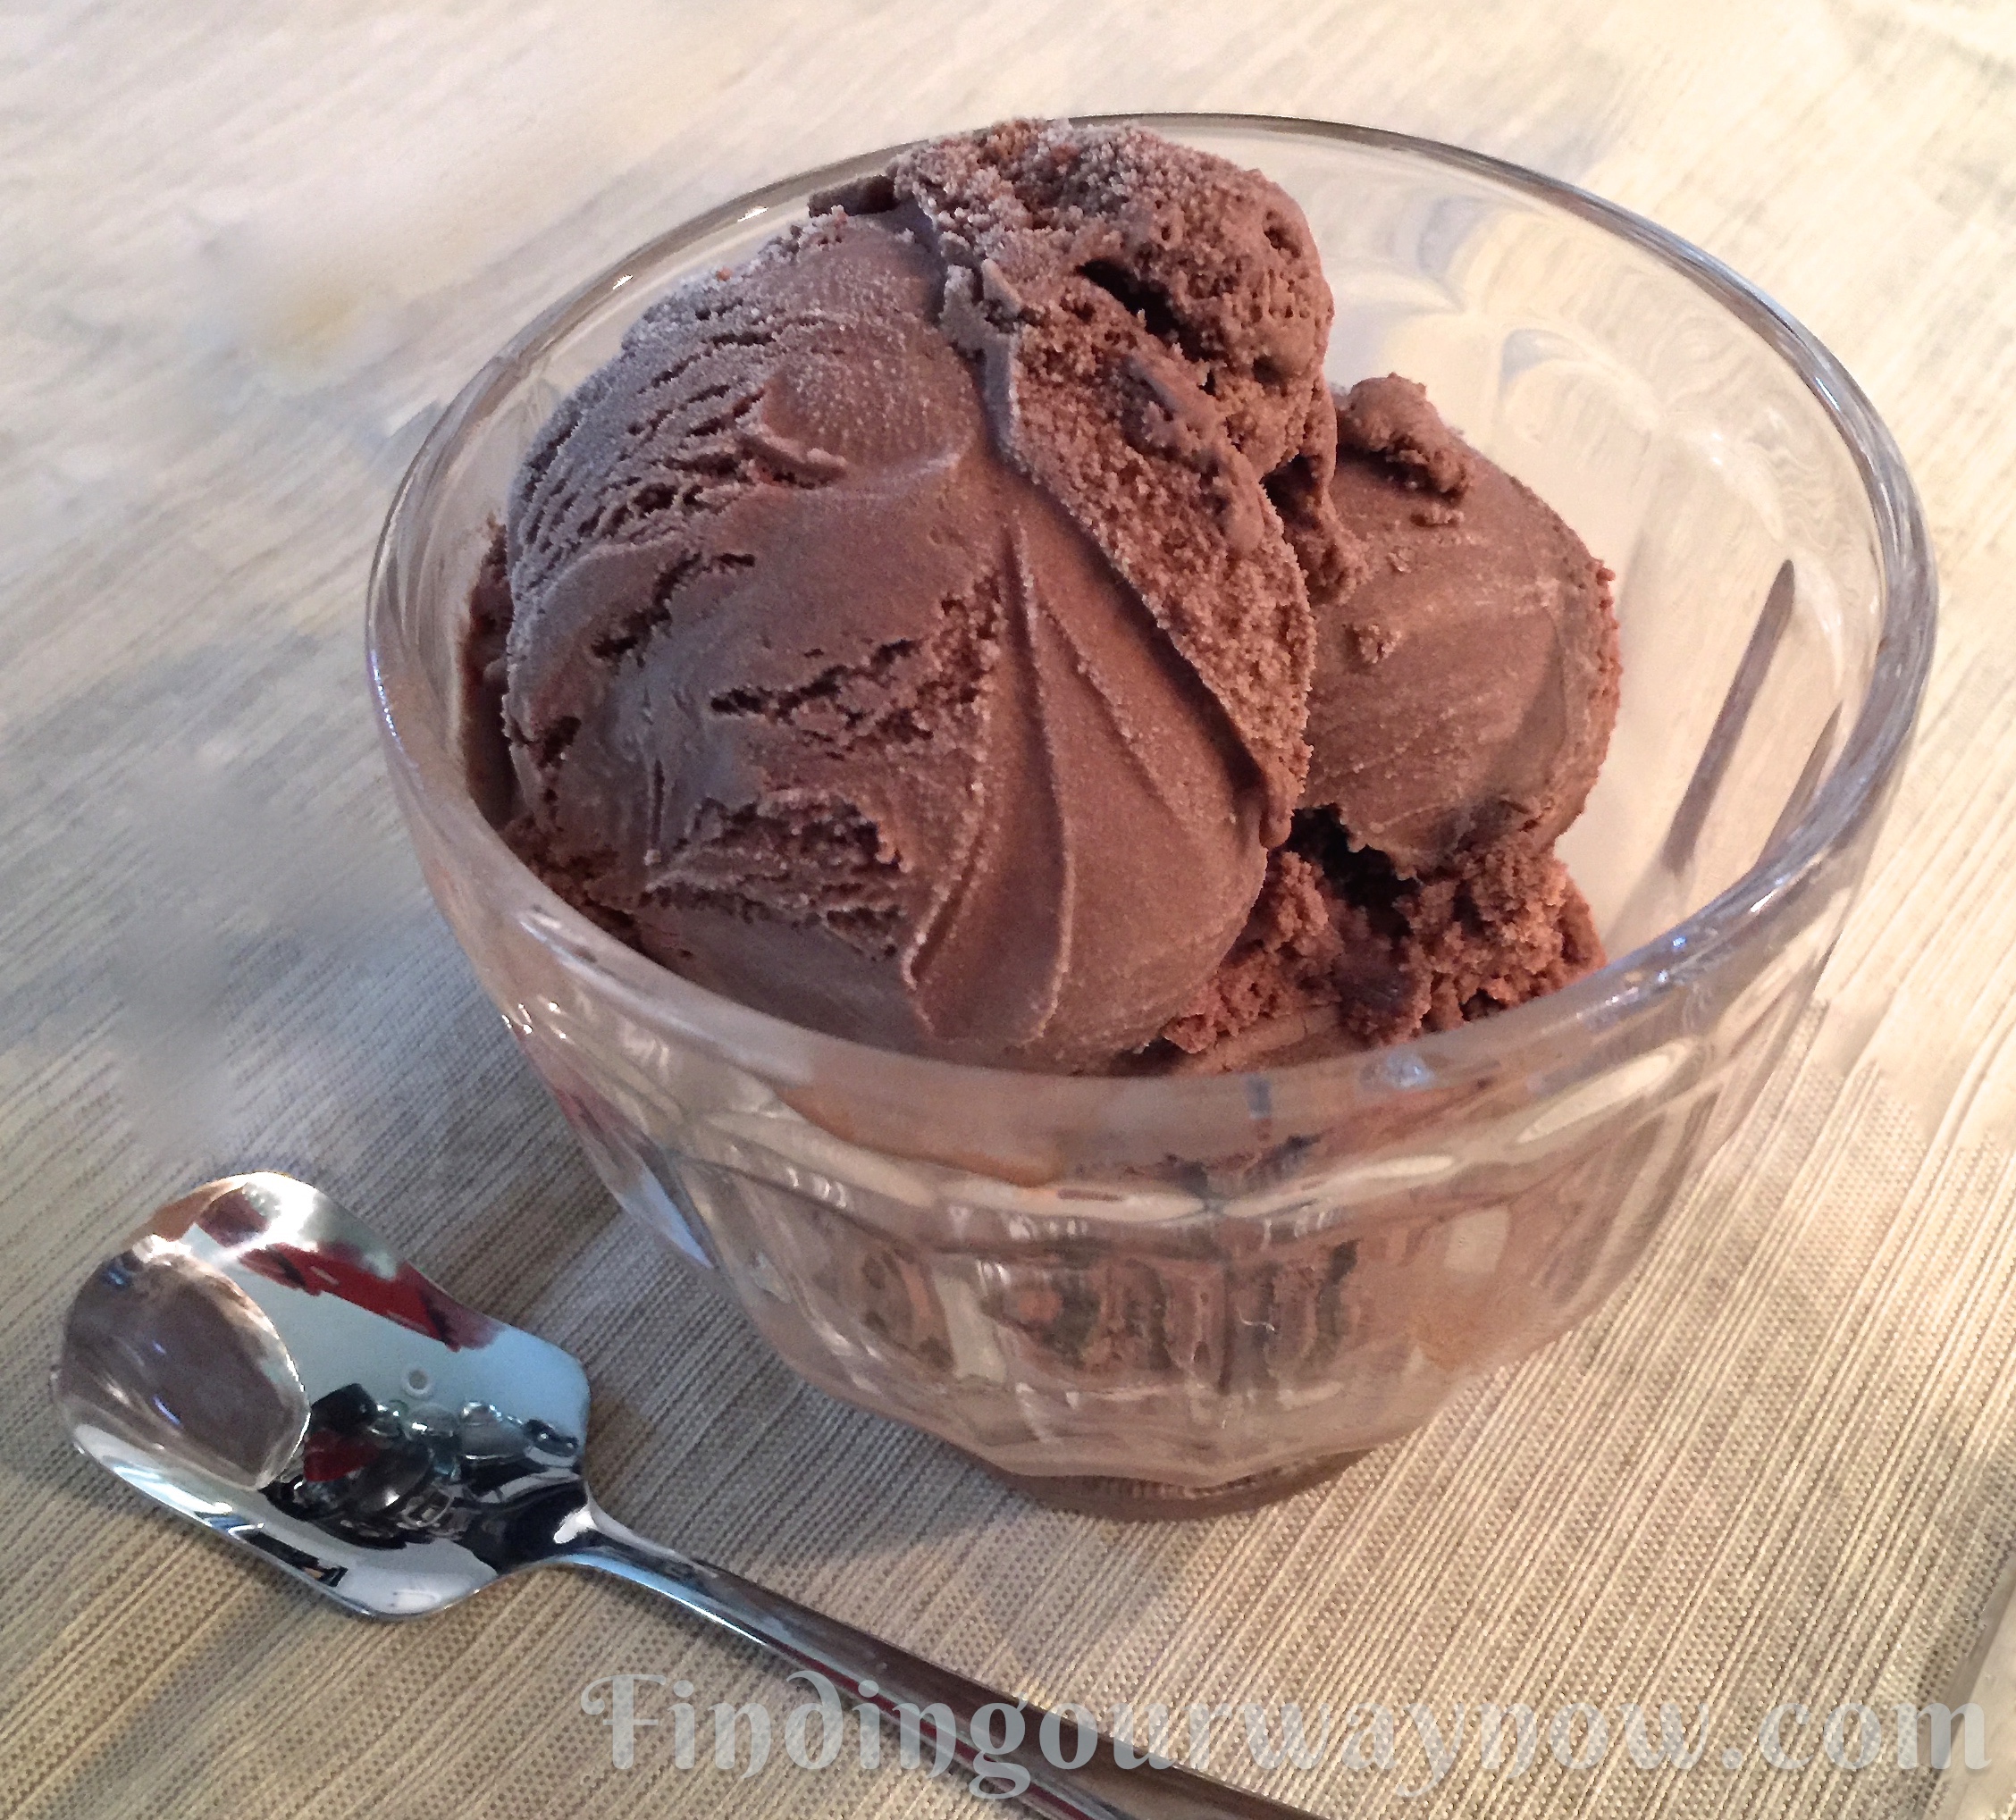 Homemade Chocolate Ice Cream: #Recipe - Finding Our Way Now
